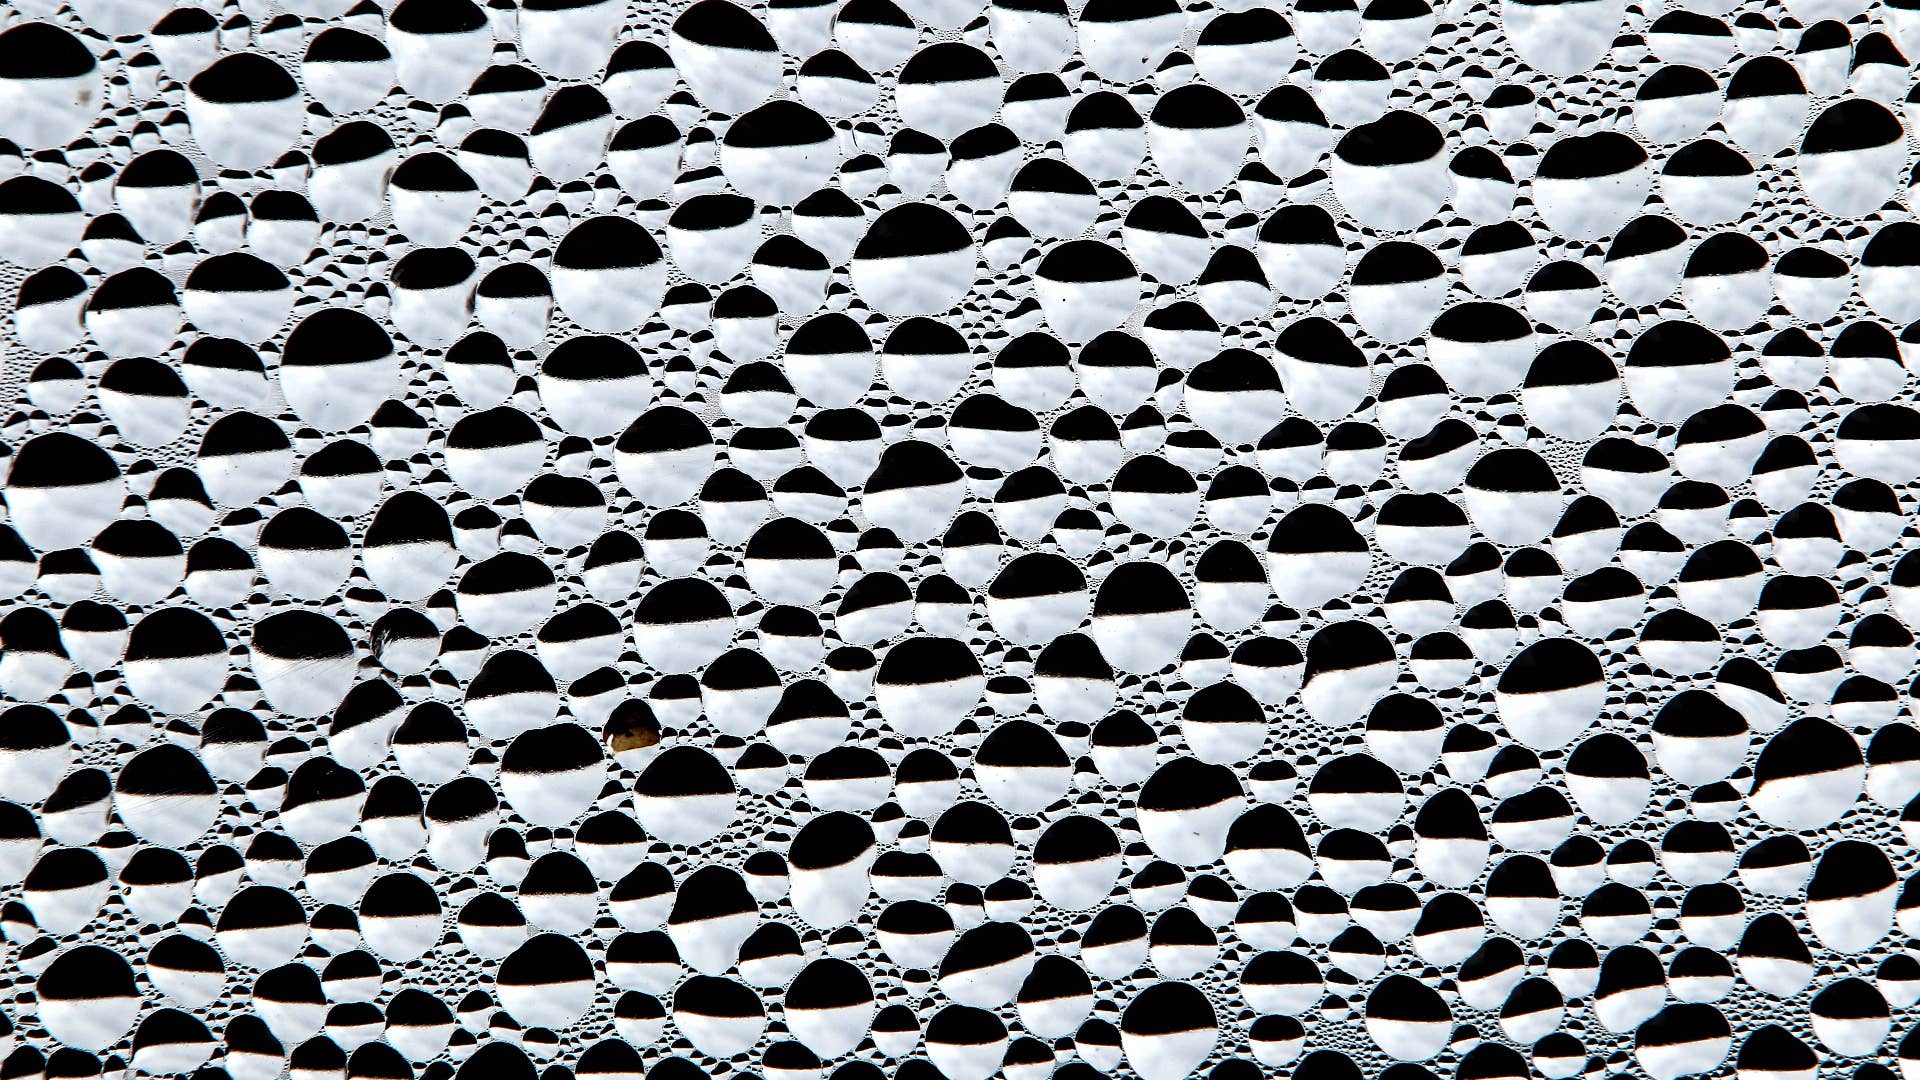 Condensation droplets are seen on a window on January 16, 2014 in Irsee, Germany.